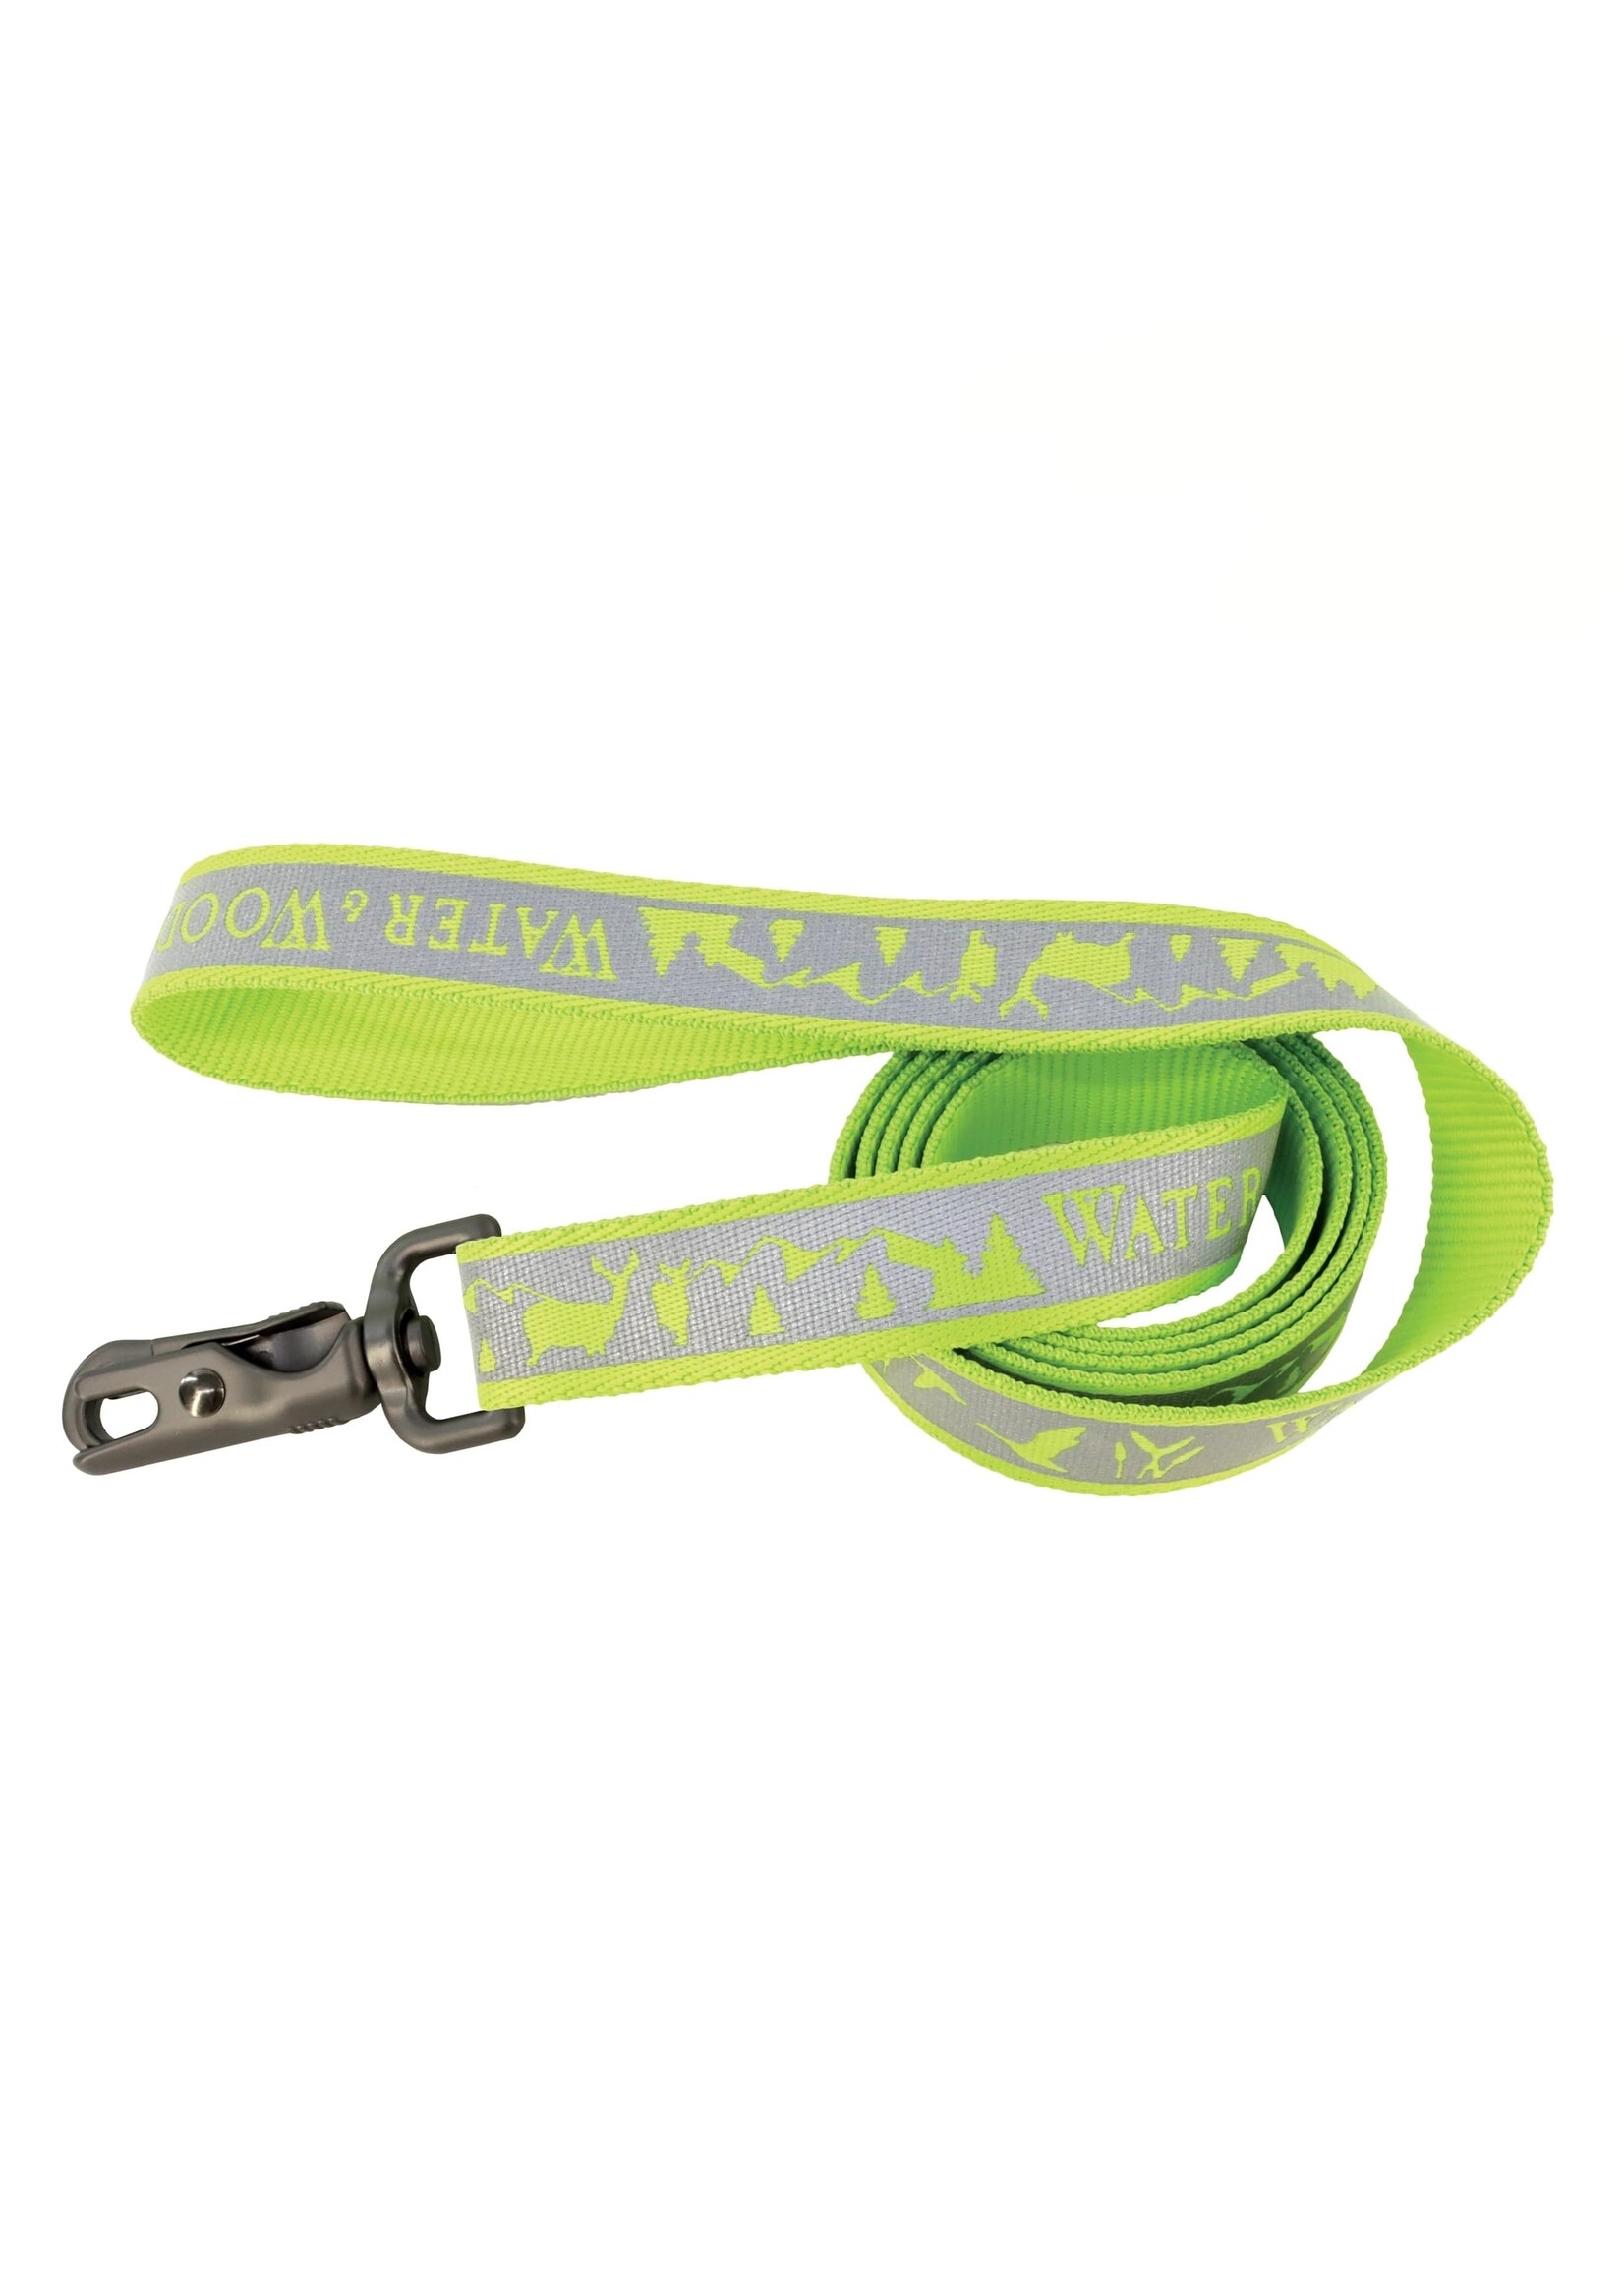 Coastal Pet Products Inc. Water & Woods Reflective Leash 1" x 6' Lime